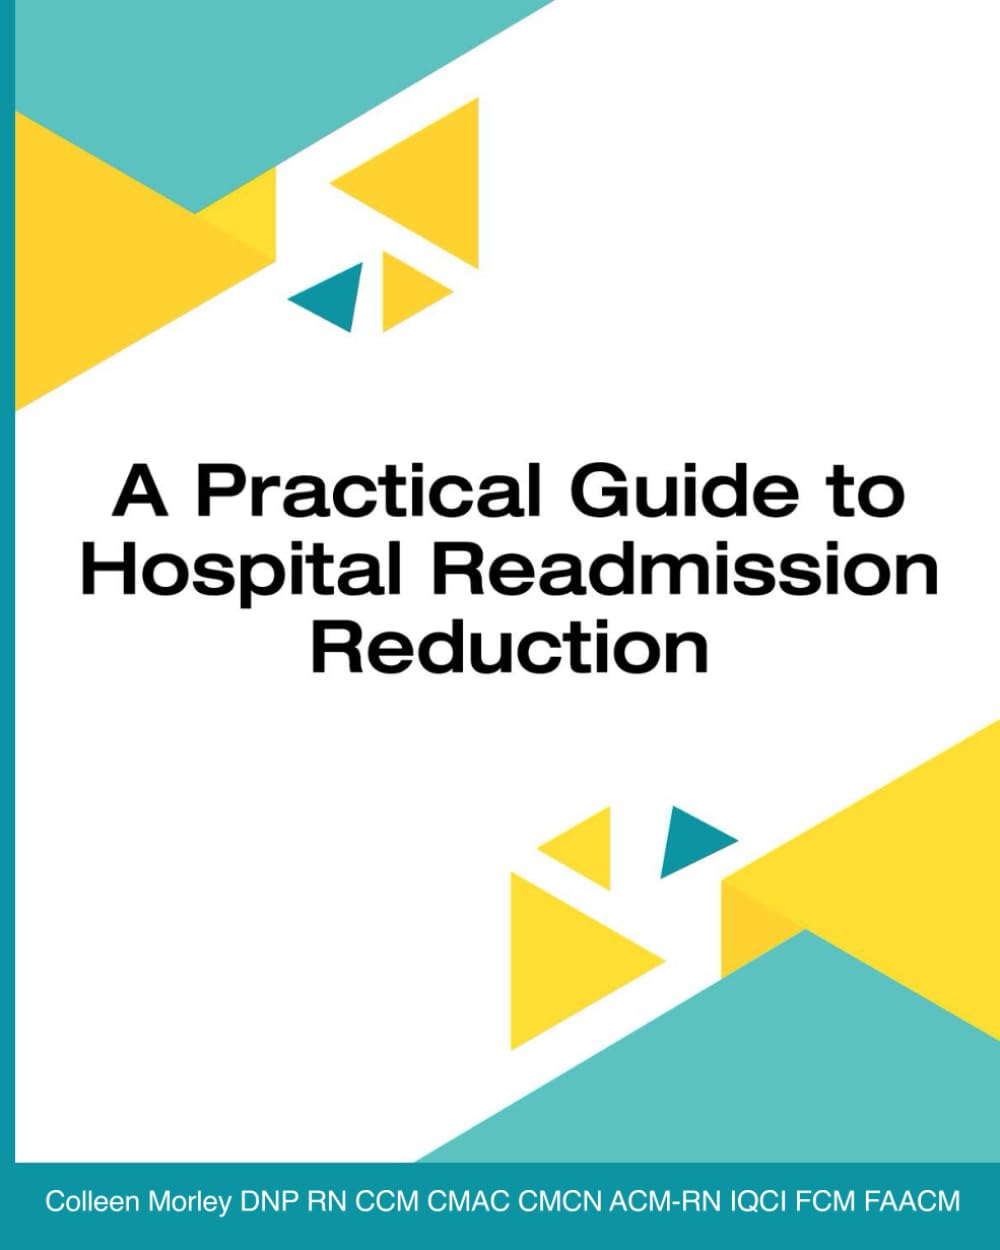 A Practical Guide to Hospital Readmission Reduction